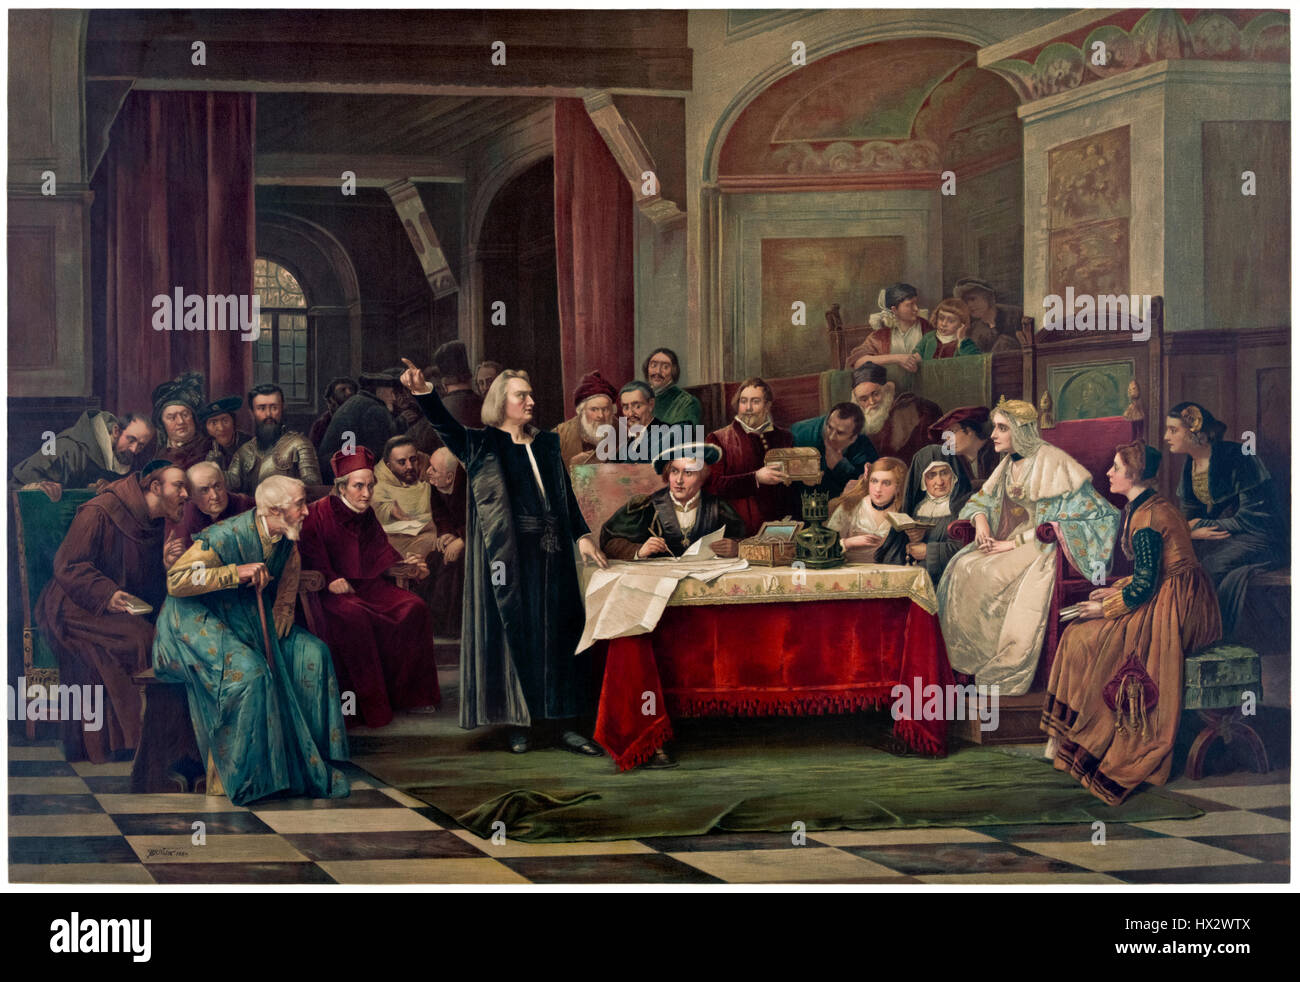 “Christopher Columbus at the Royal Court of Spain” showing Christopher Columbus standing before Queen Isabella I of Castile and King Ferdinand II of Aragon on 1 May 1486 petitioning for finance to fund his planned exploration to find a western route to the Orient. Colour lithograph of a painting by Václav Brožík (1851-1901) published in 1884. Stock Photo